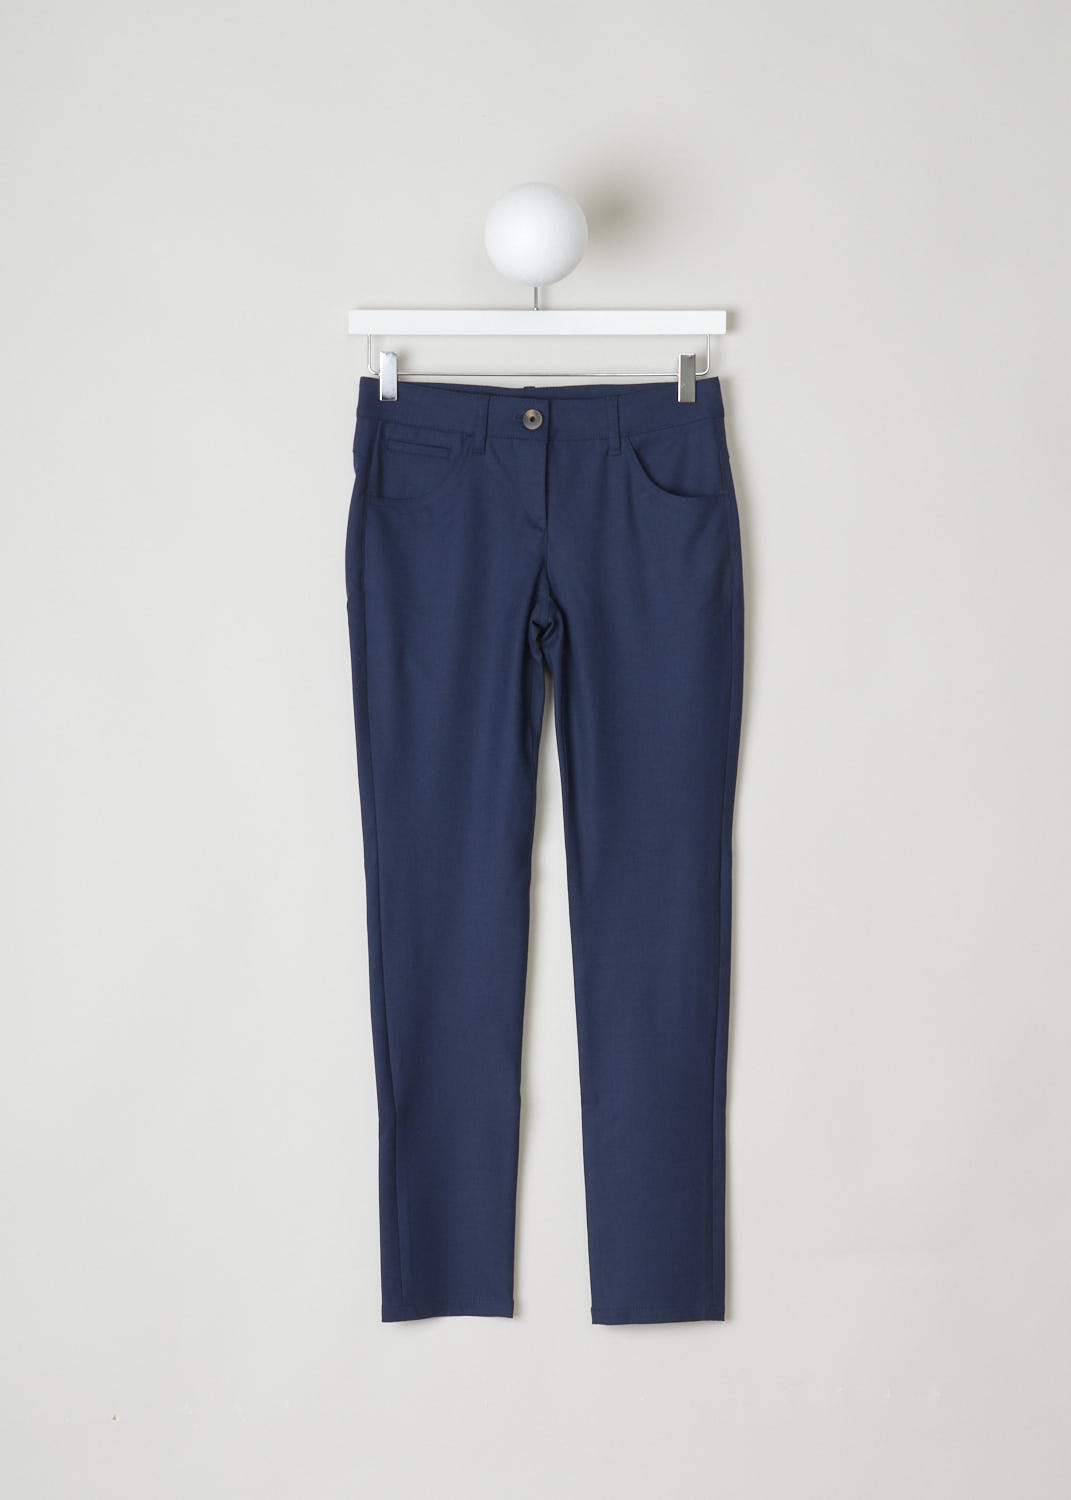 BRUNELLO CUCINELLI, NAVY BLUE WOOL PANTS, M0L15P1790_C2632, Blue, Front, Form fitting dark blue pants made with a wool blend. These pants have a waistband with belt loops and a single button and concealed zipper closure. These pants have a traditional five pocket configuration, meaning in the front there are two rounded pockets and a single coin pocket, and two pockets in the back.
